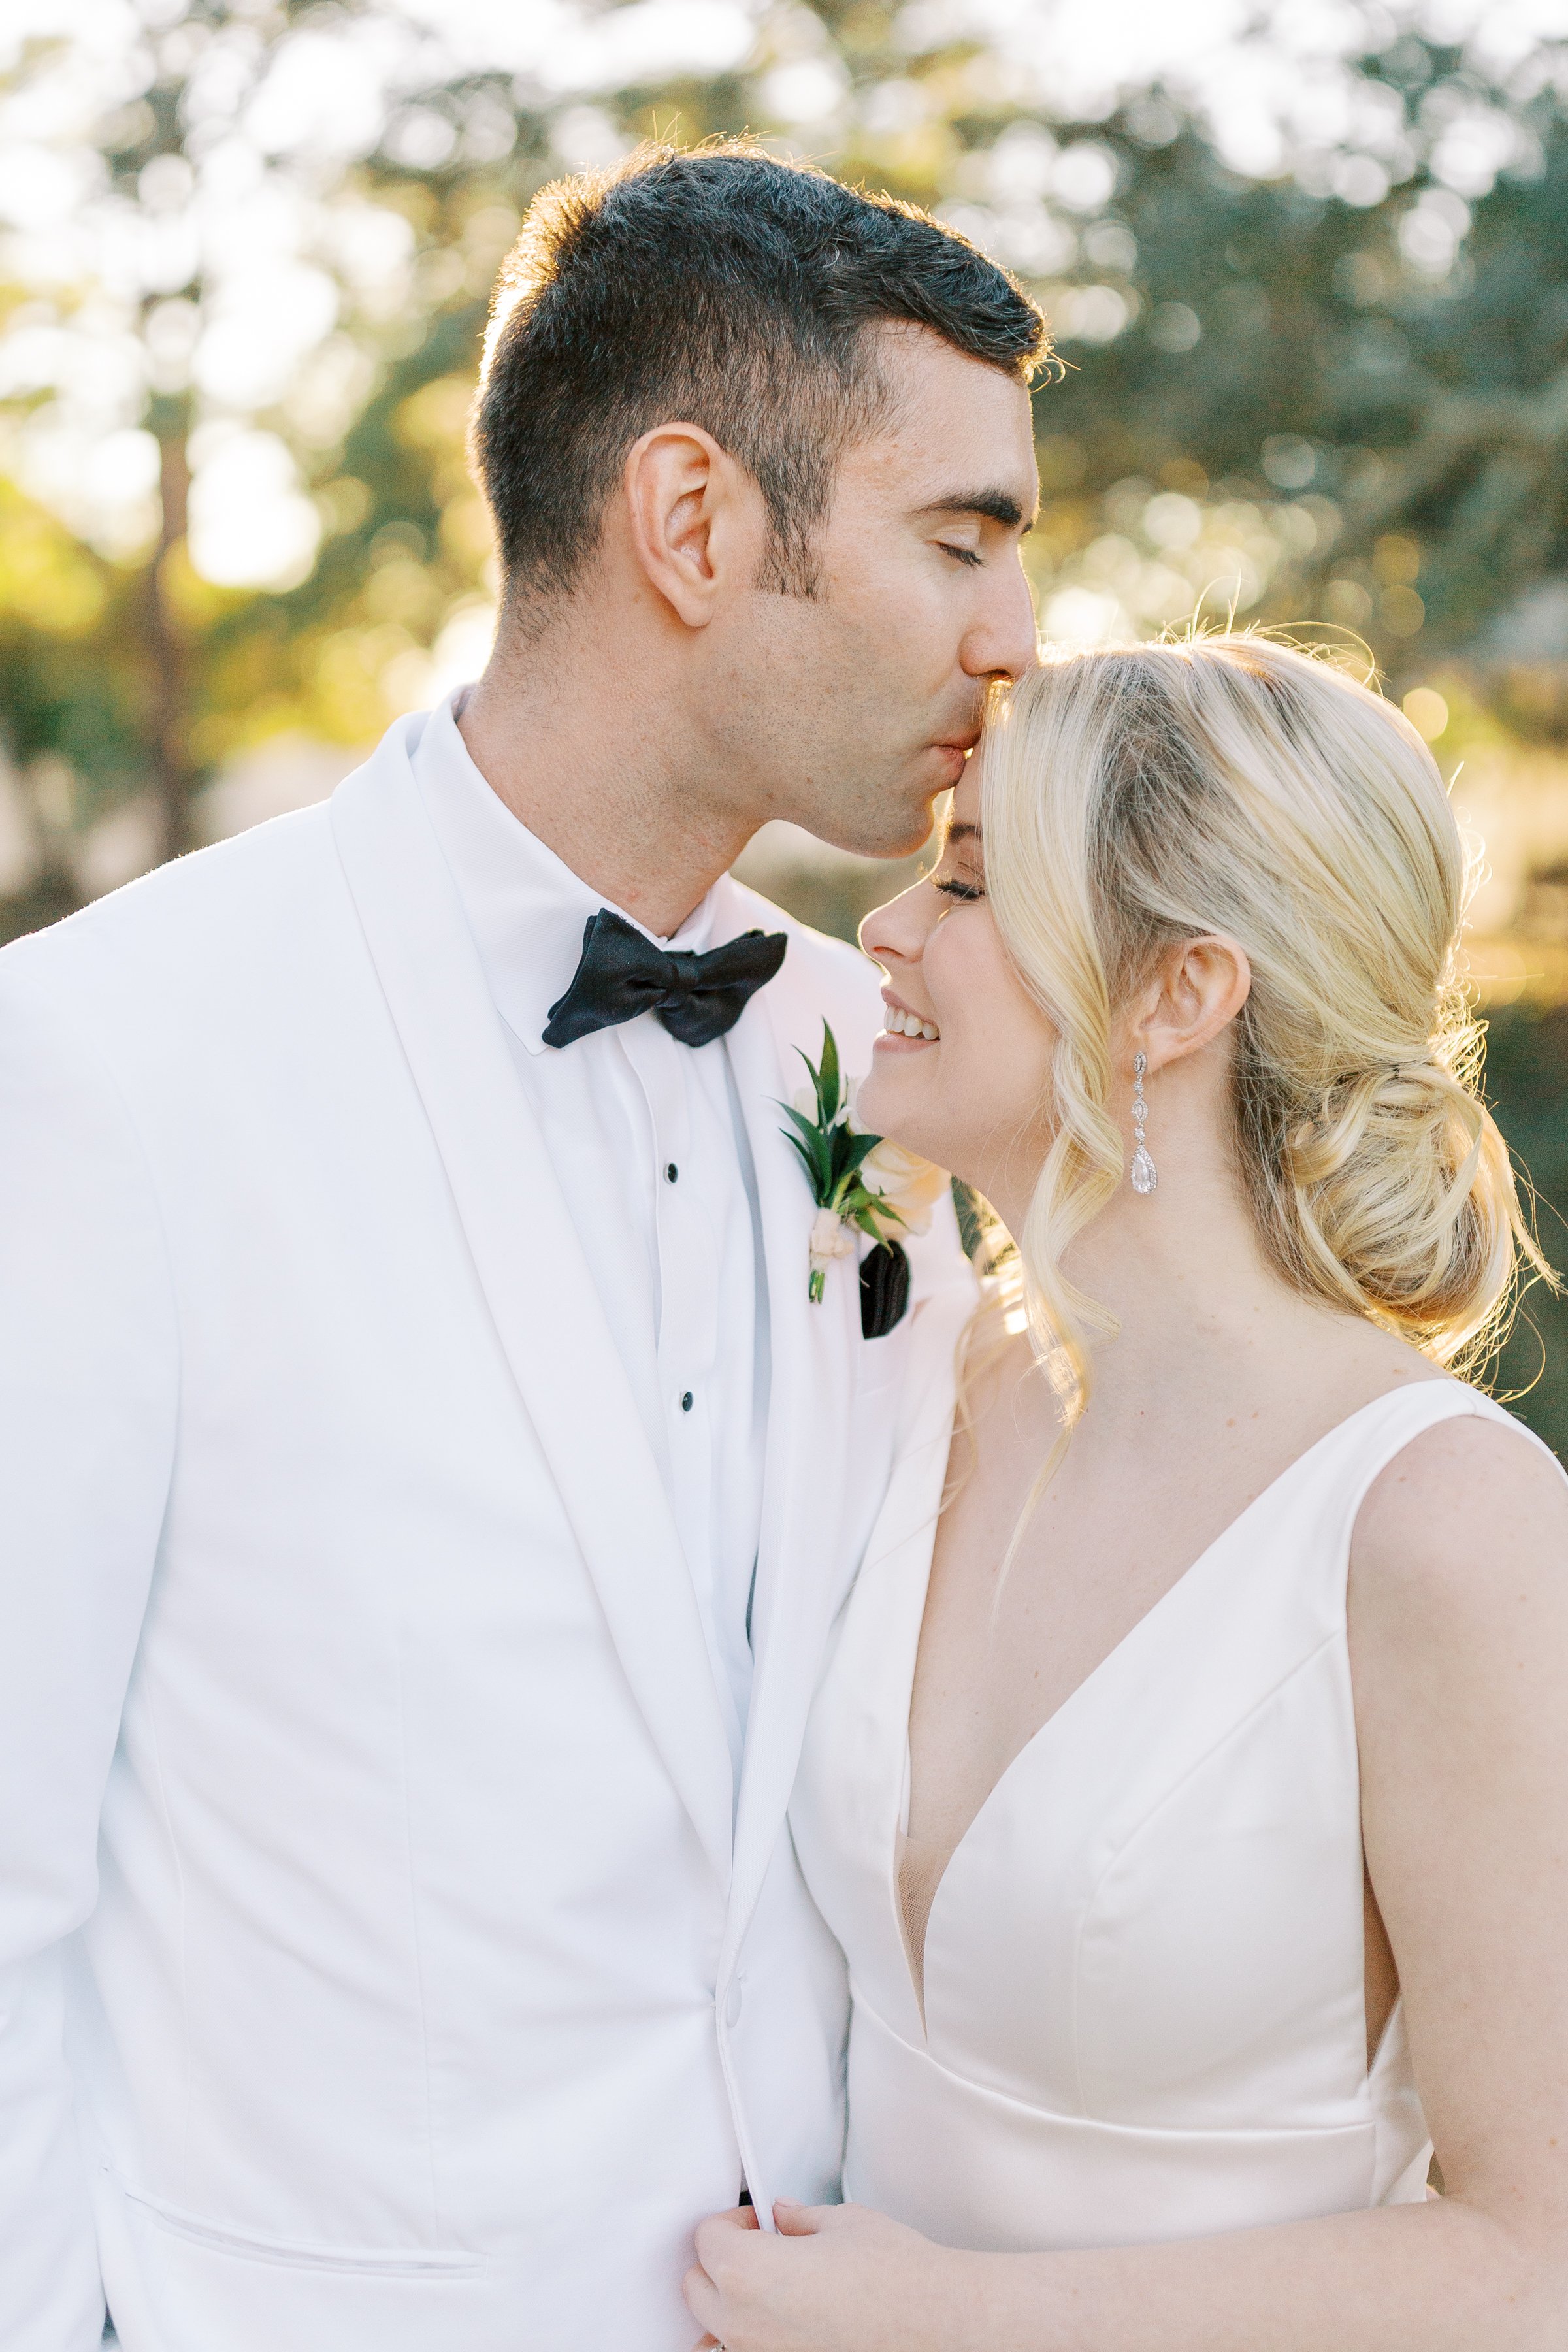 cheyenne-and-nicks-wedding-at-the-tybee-island-wedding-chapel-planned-by-savannah-wedding-planner-ivory-and-beau-with-sottero-and-midgley-gown-from-savannah-bridal-shop-and-wedding-florals-from-savannah-florist-15.jpg